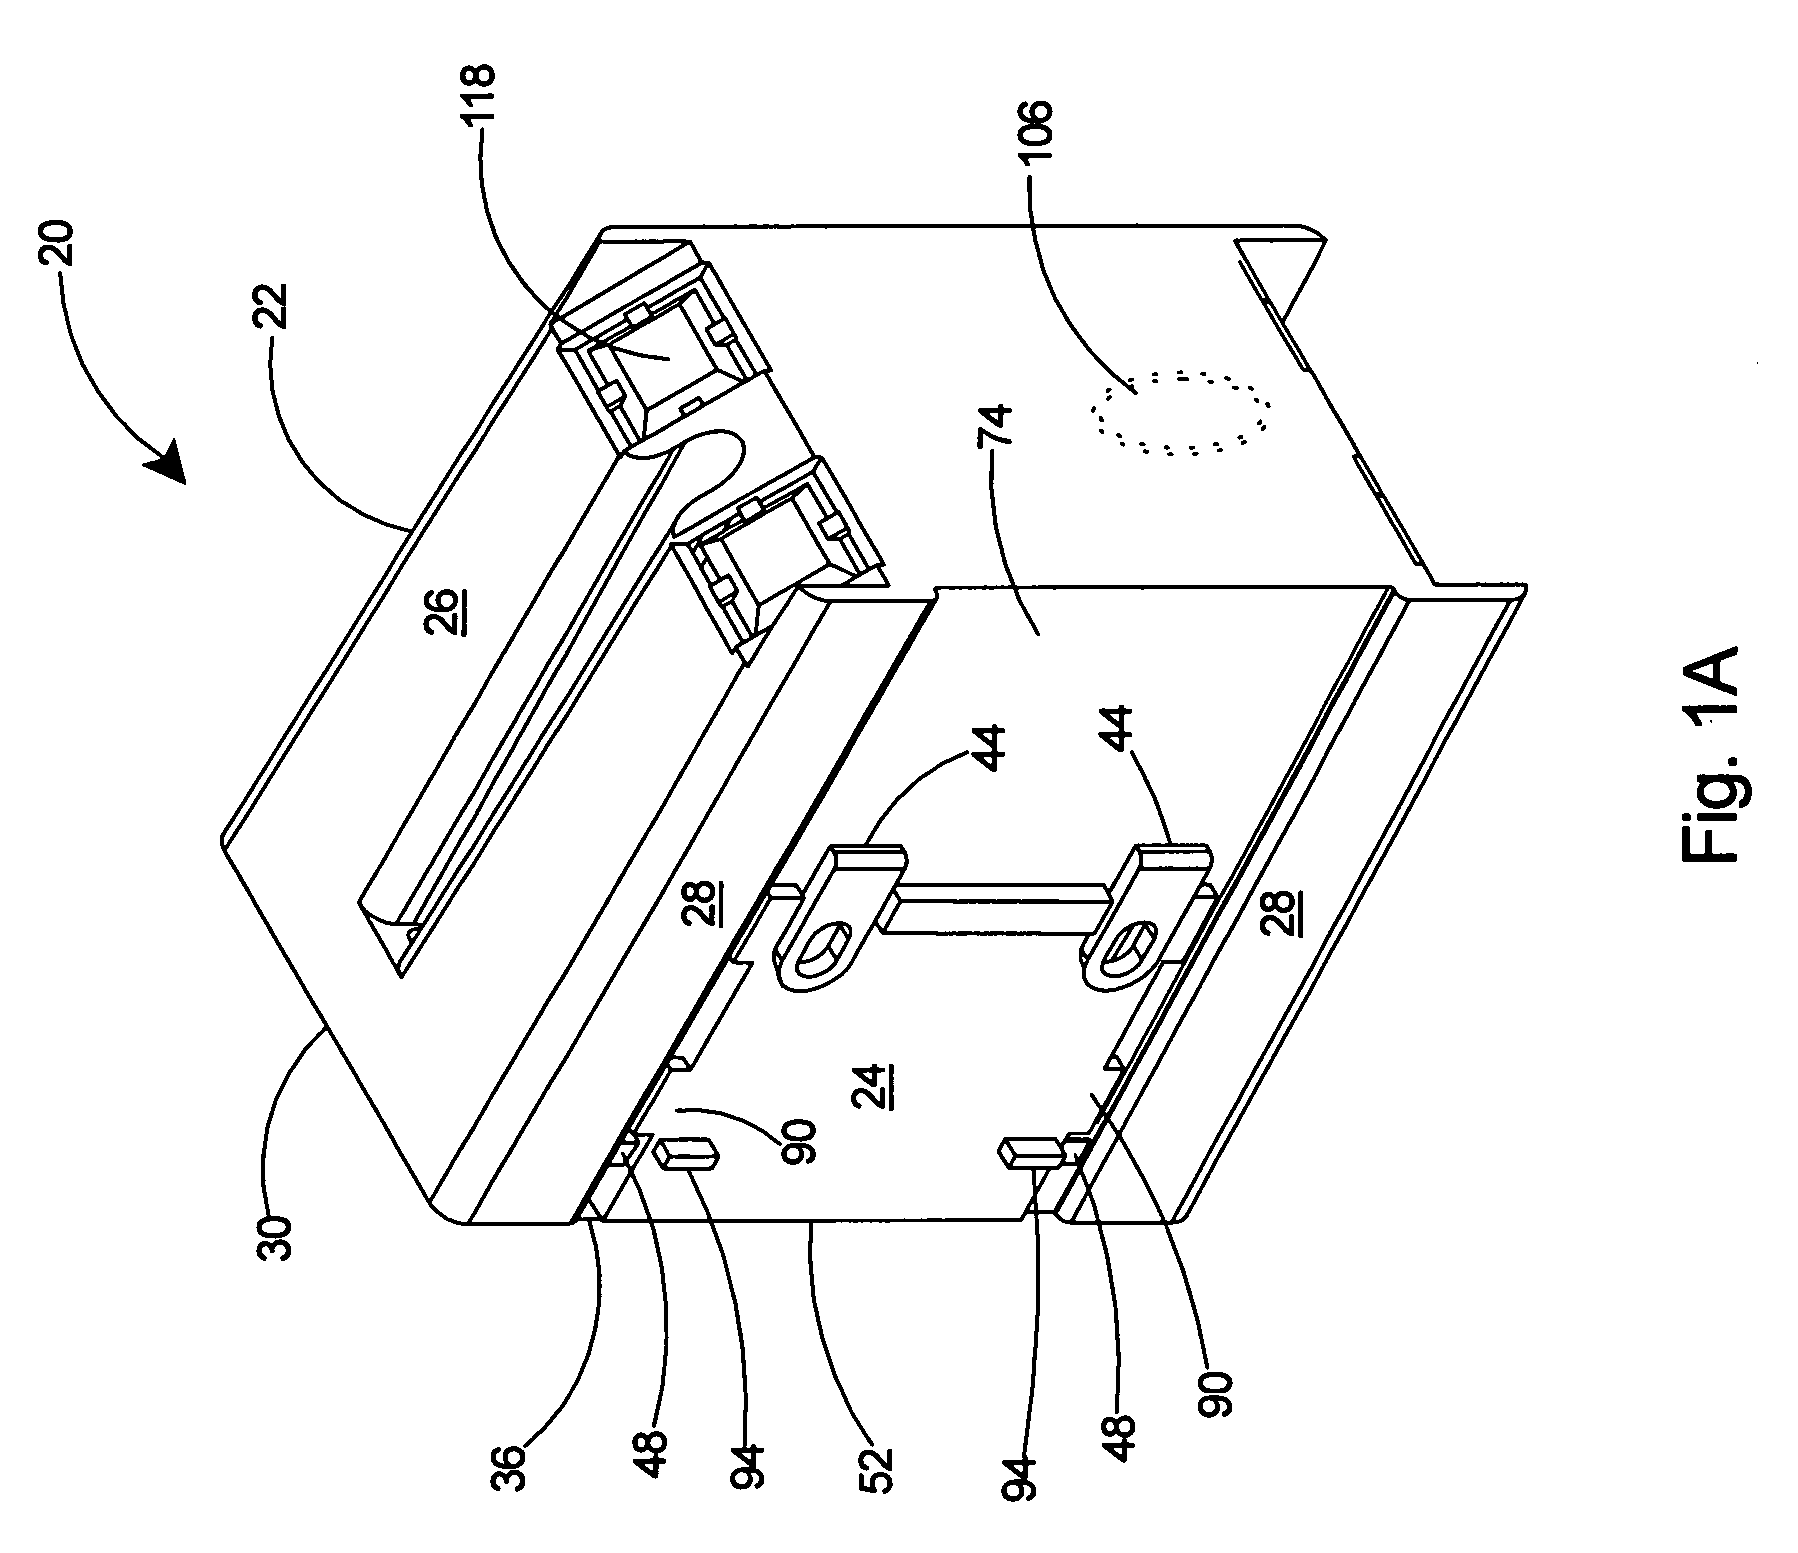 Large volume electrical box with internal mounting arrangement